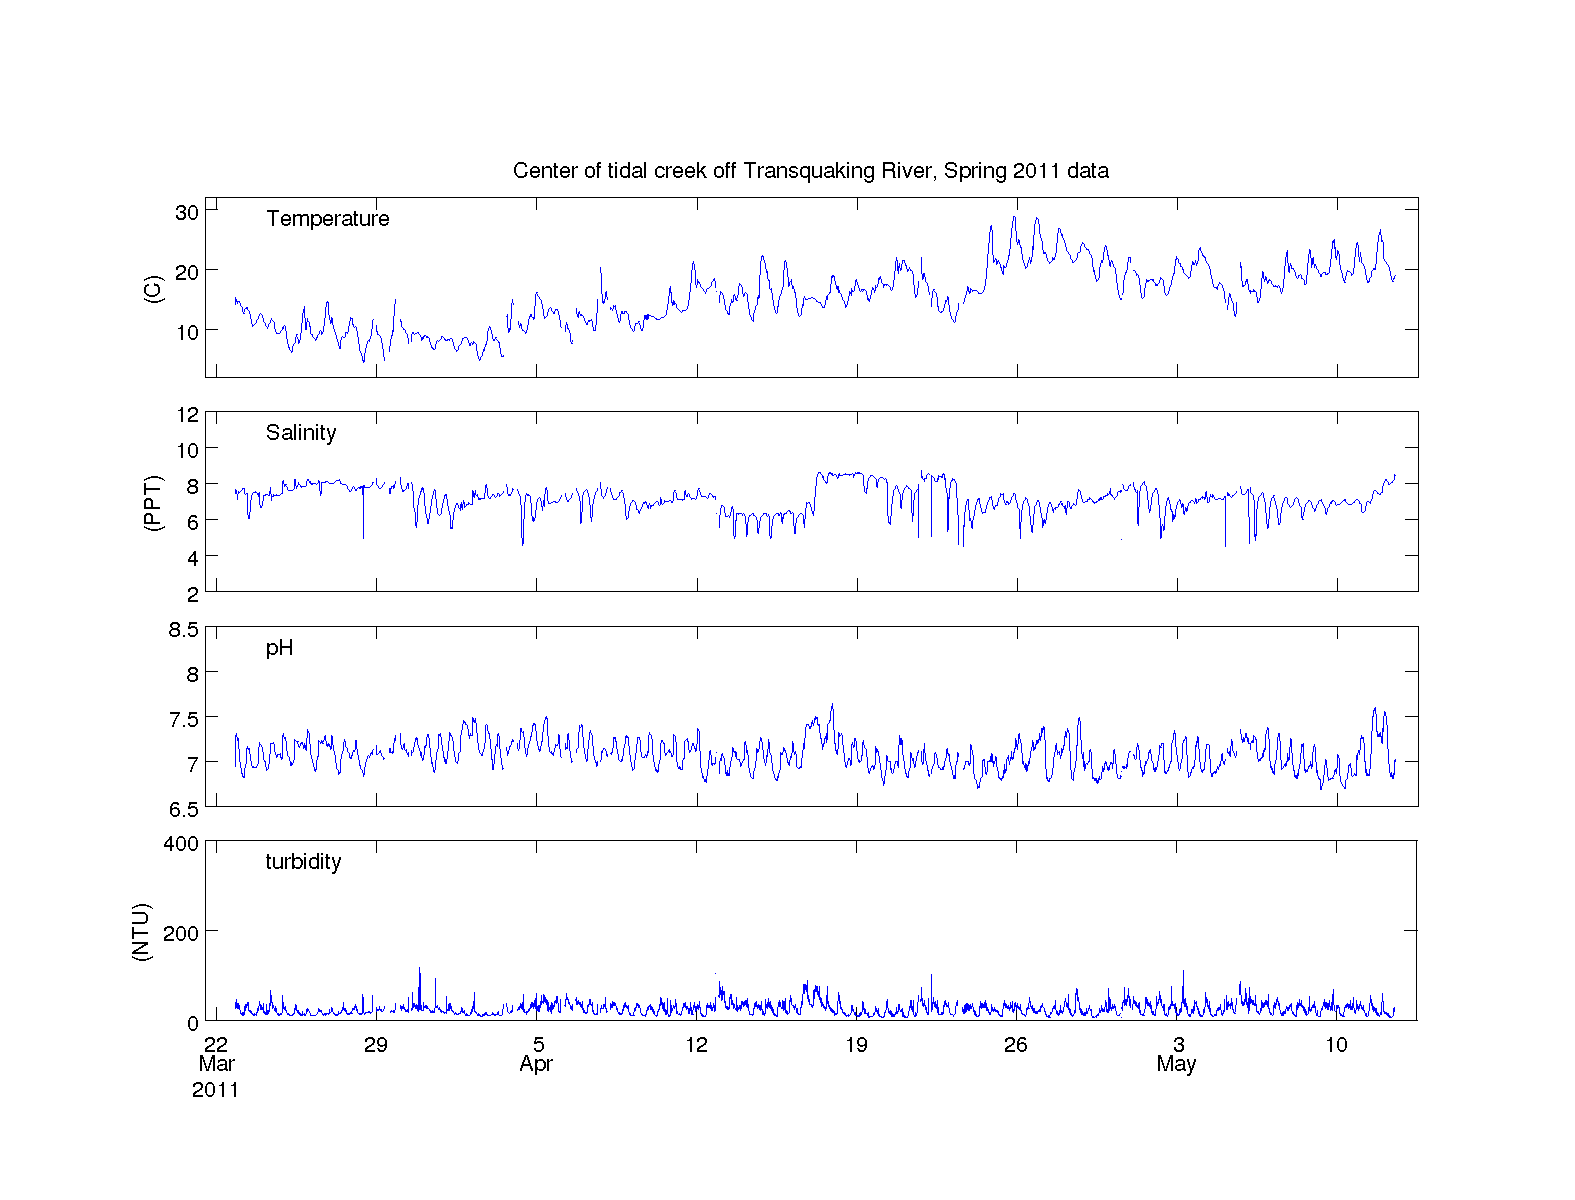 Figure 12. Spring 2011 data from 904.